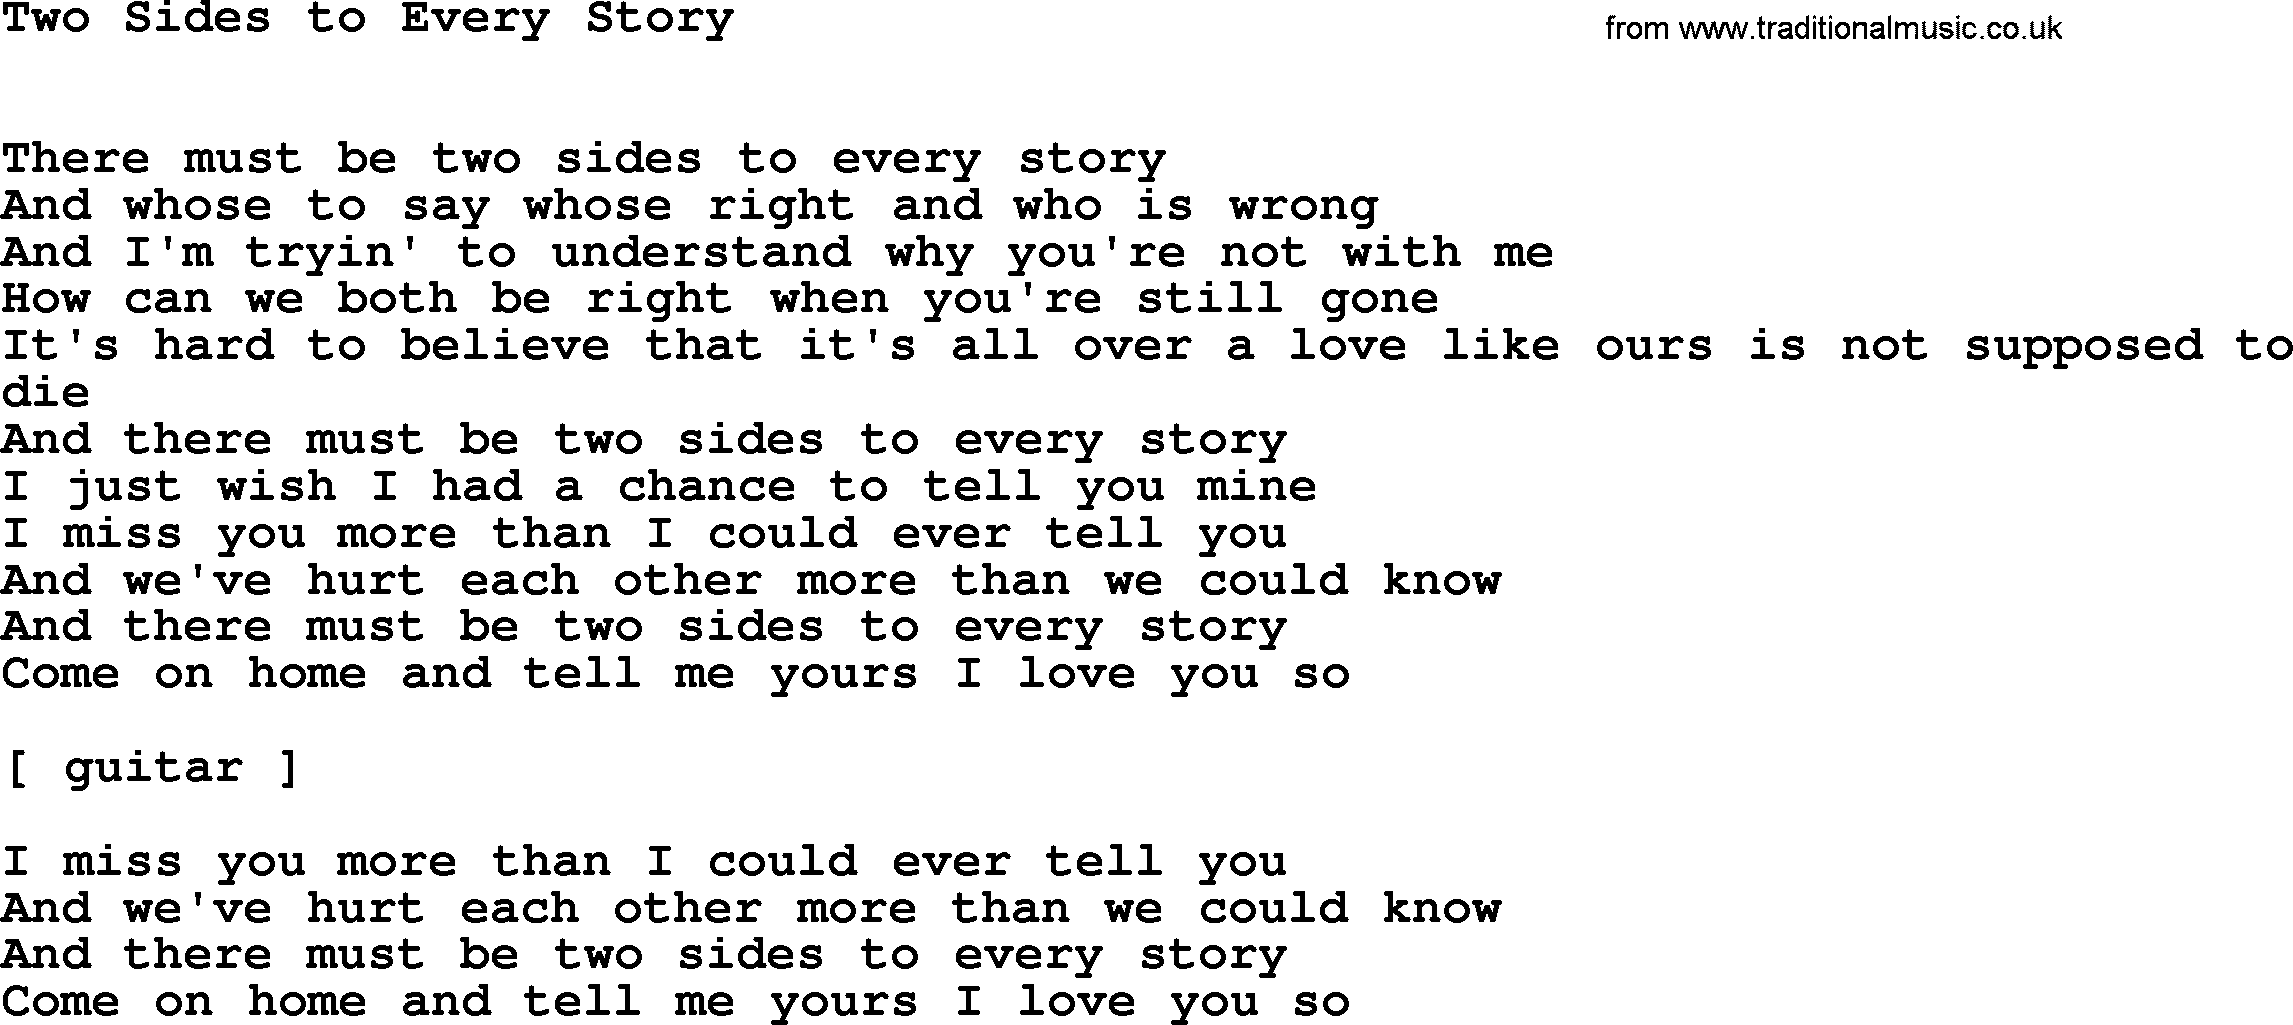 Willie Nelson song: Two Sides to Every Story lyrics